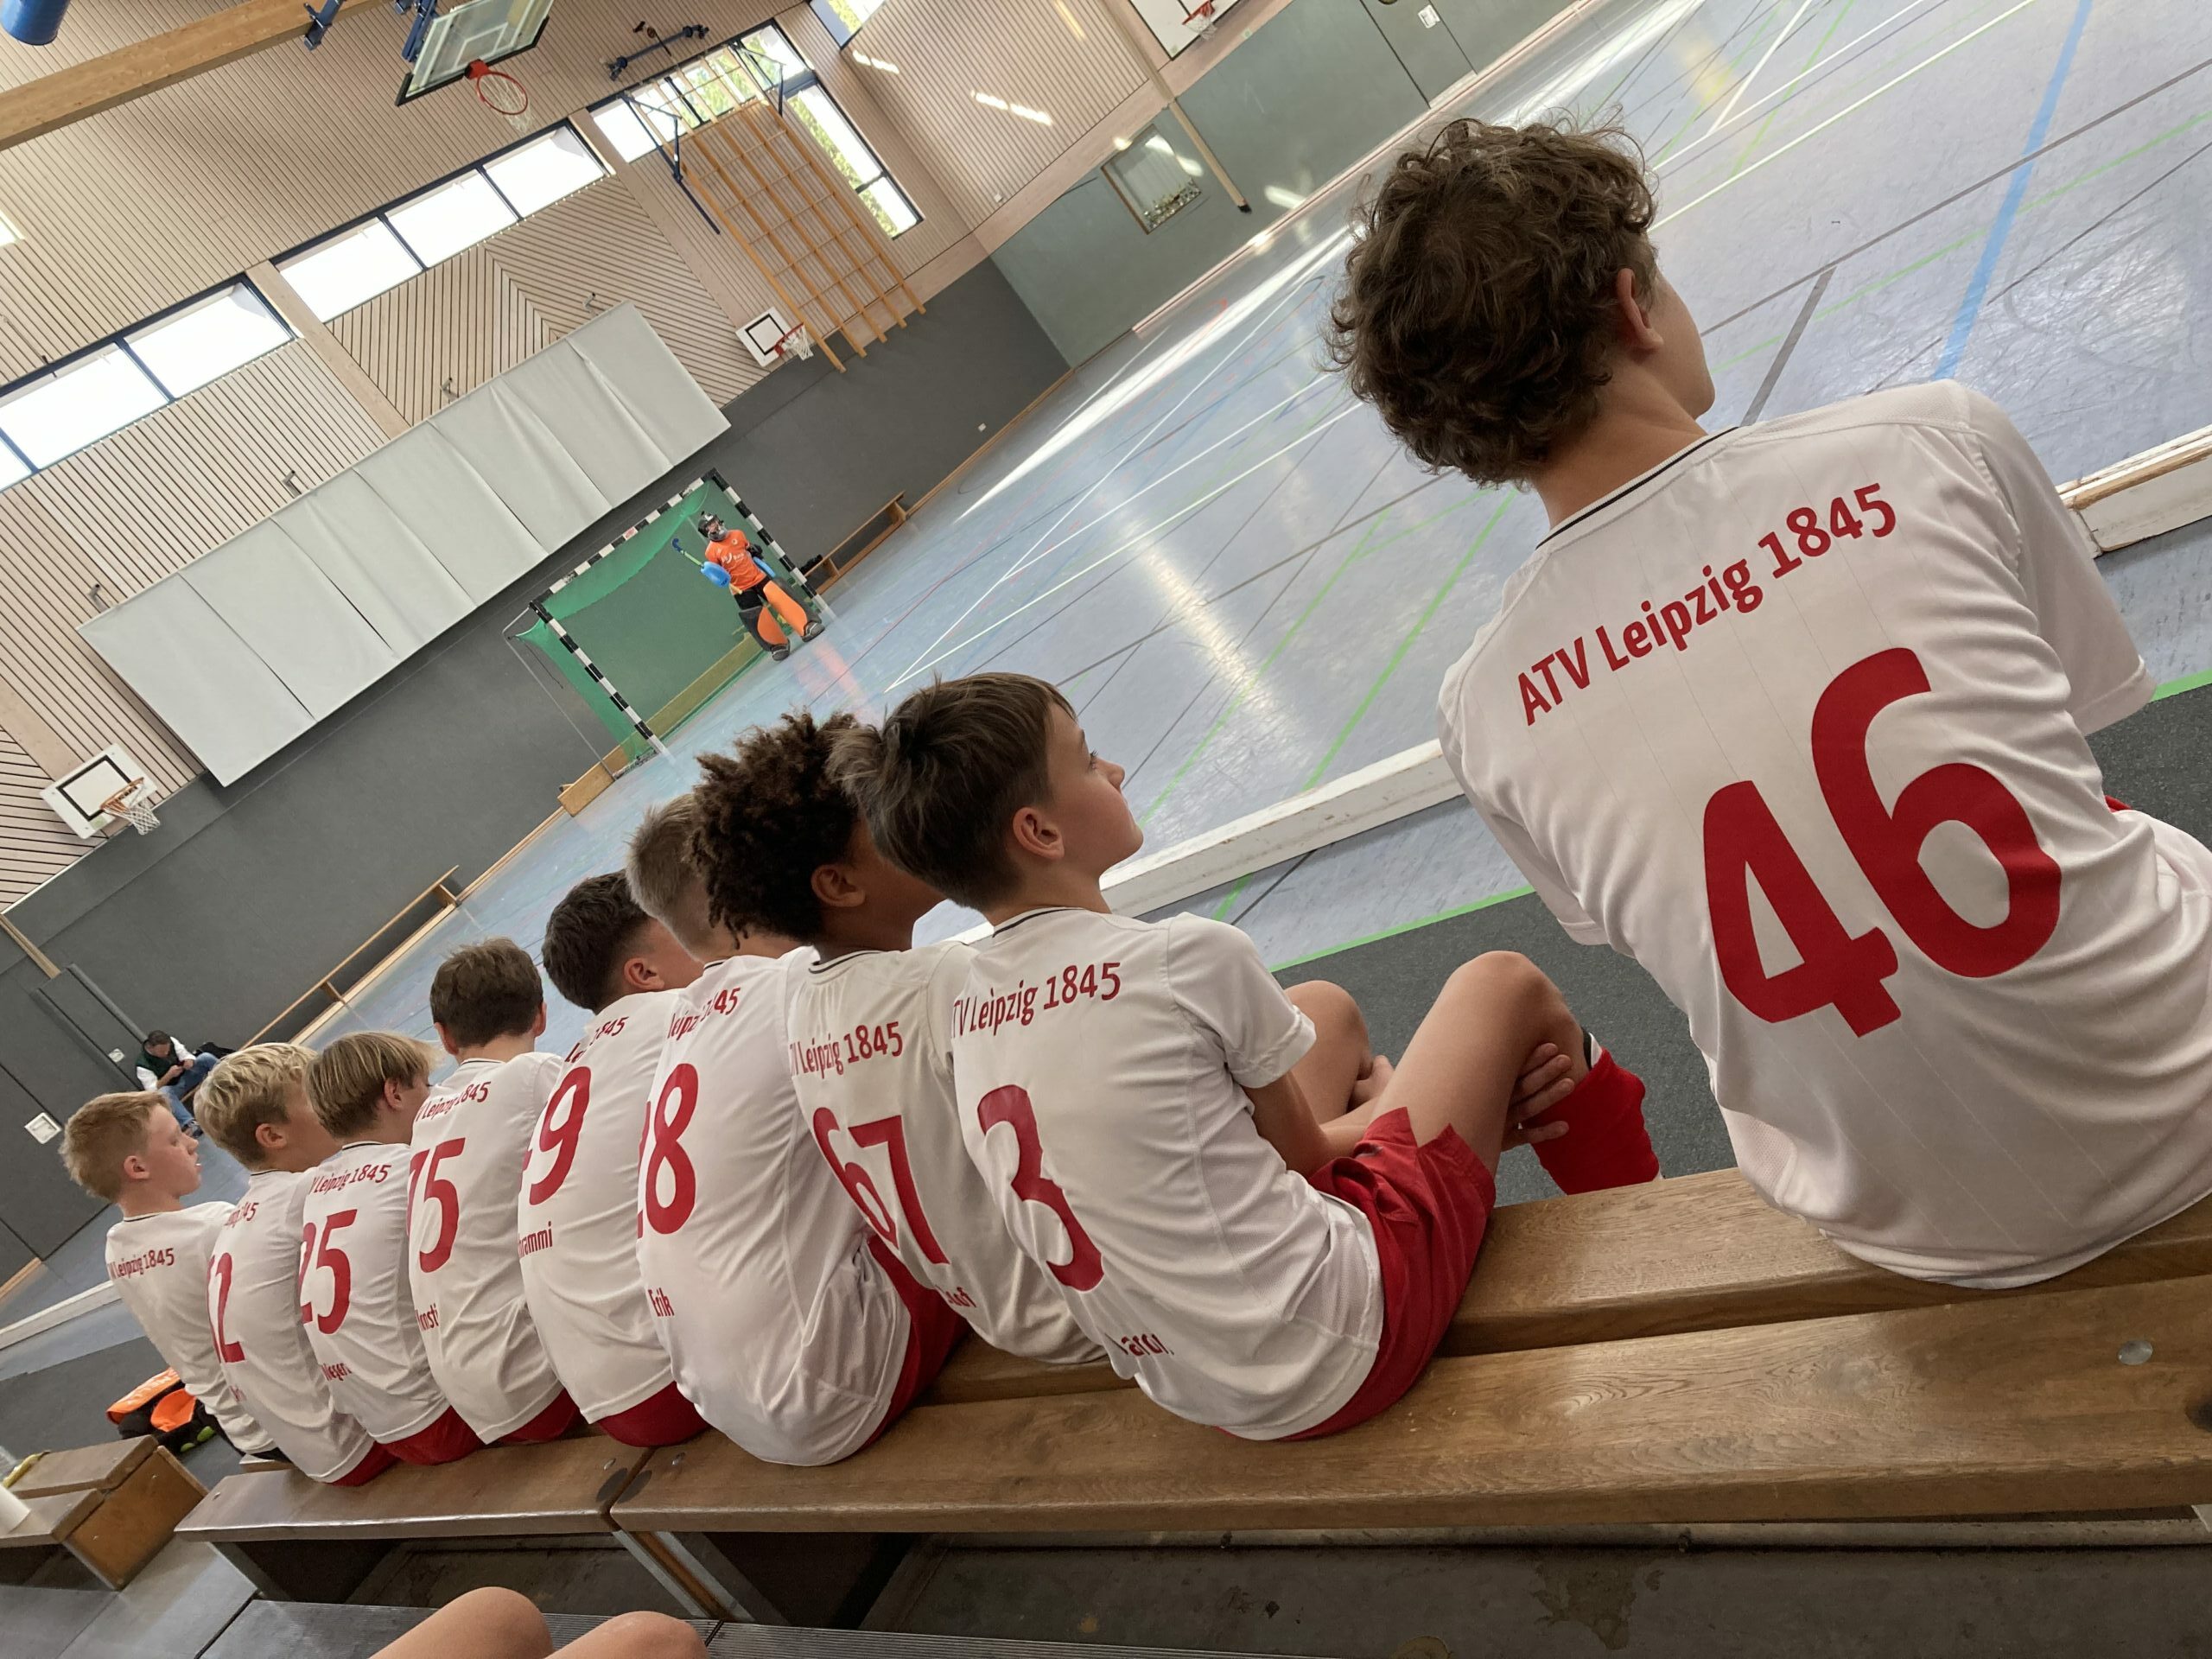 Youngster-Cup in Köthen